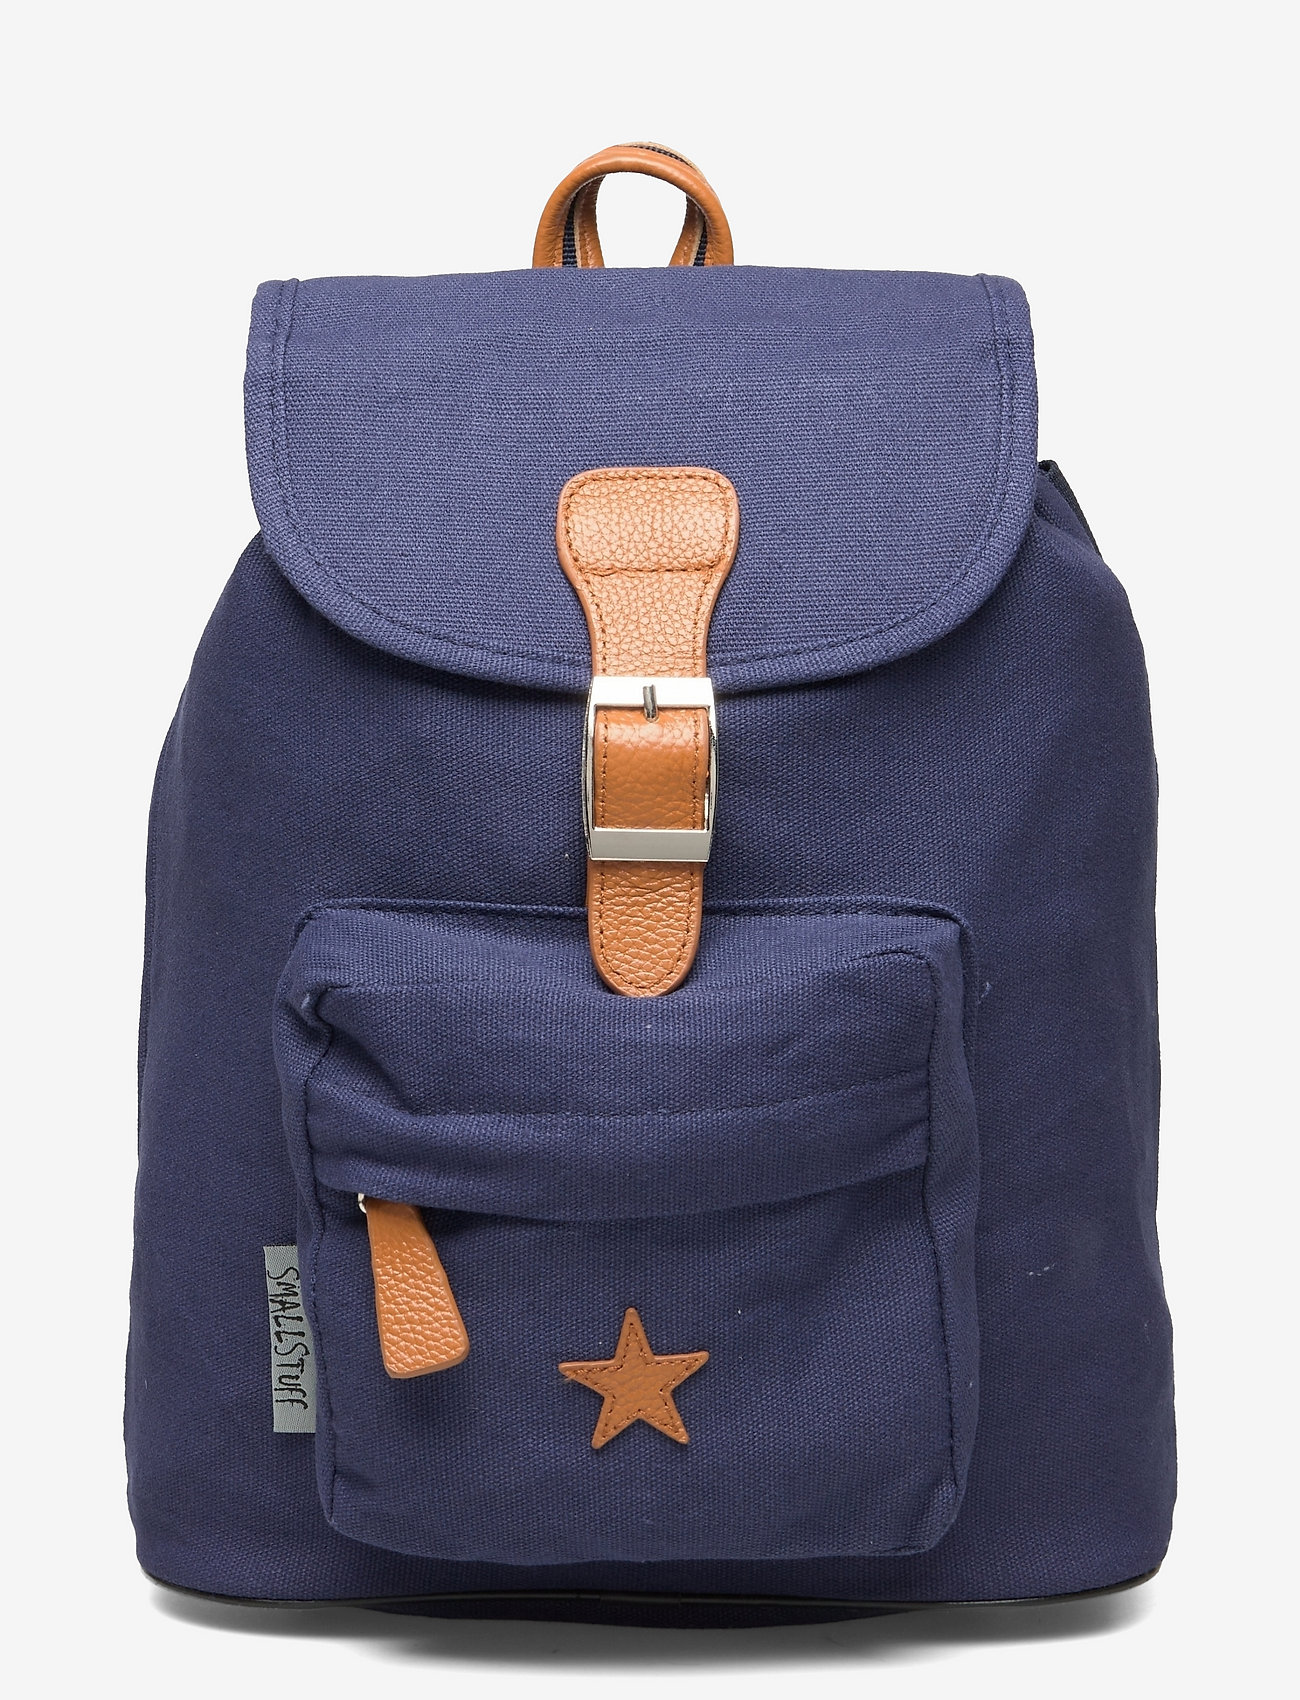 Smallstuff - Baggy back Pack, navy with leather Star - sommerschnäppchen - navy - 0